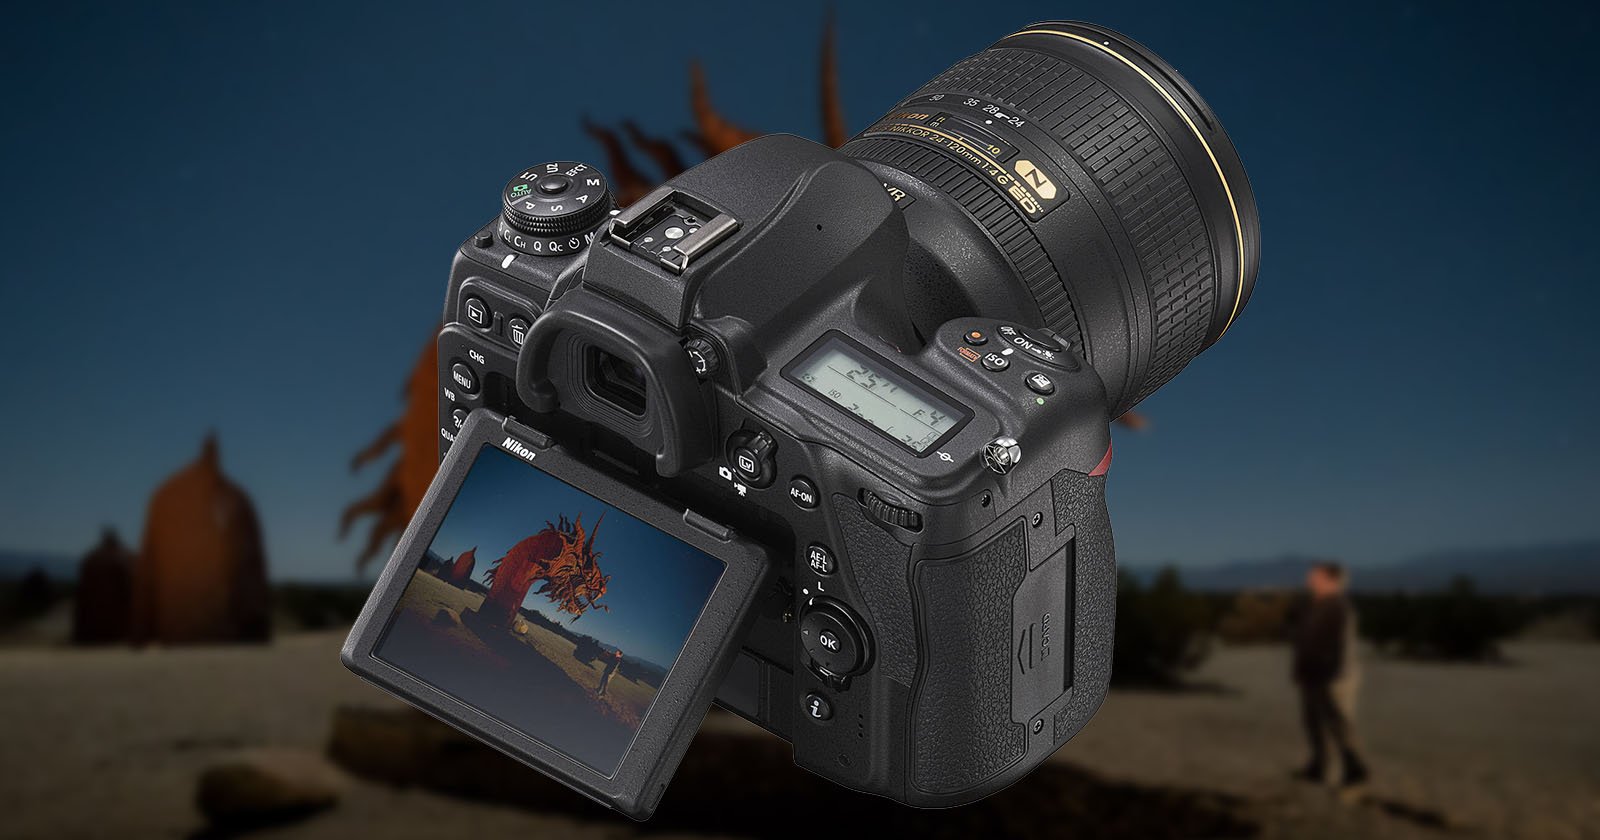 Best Worlds: The D780 Gives You the Best of the D750 Z6 | PetaPixel